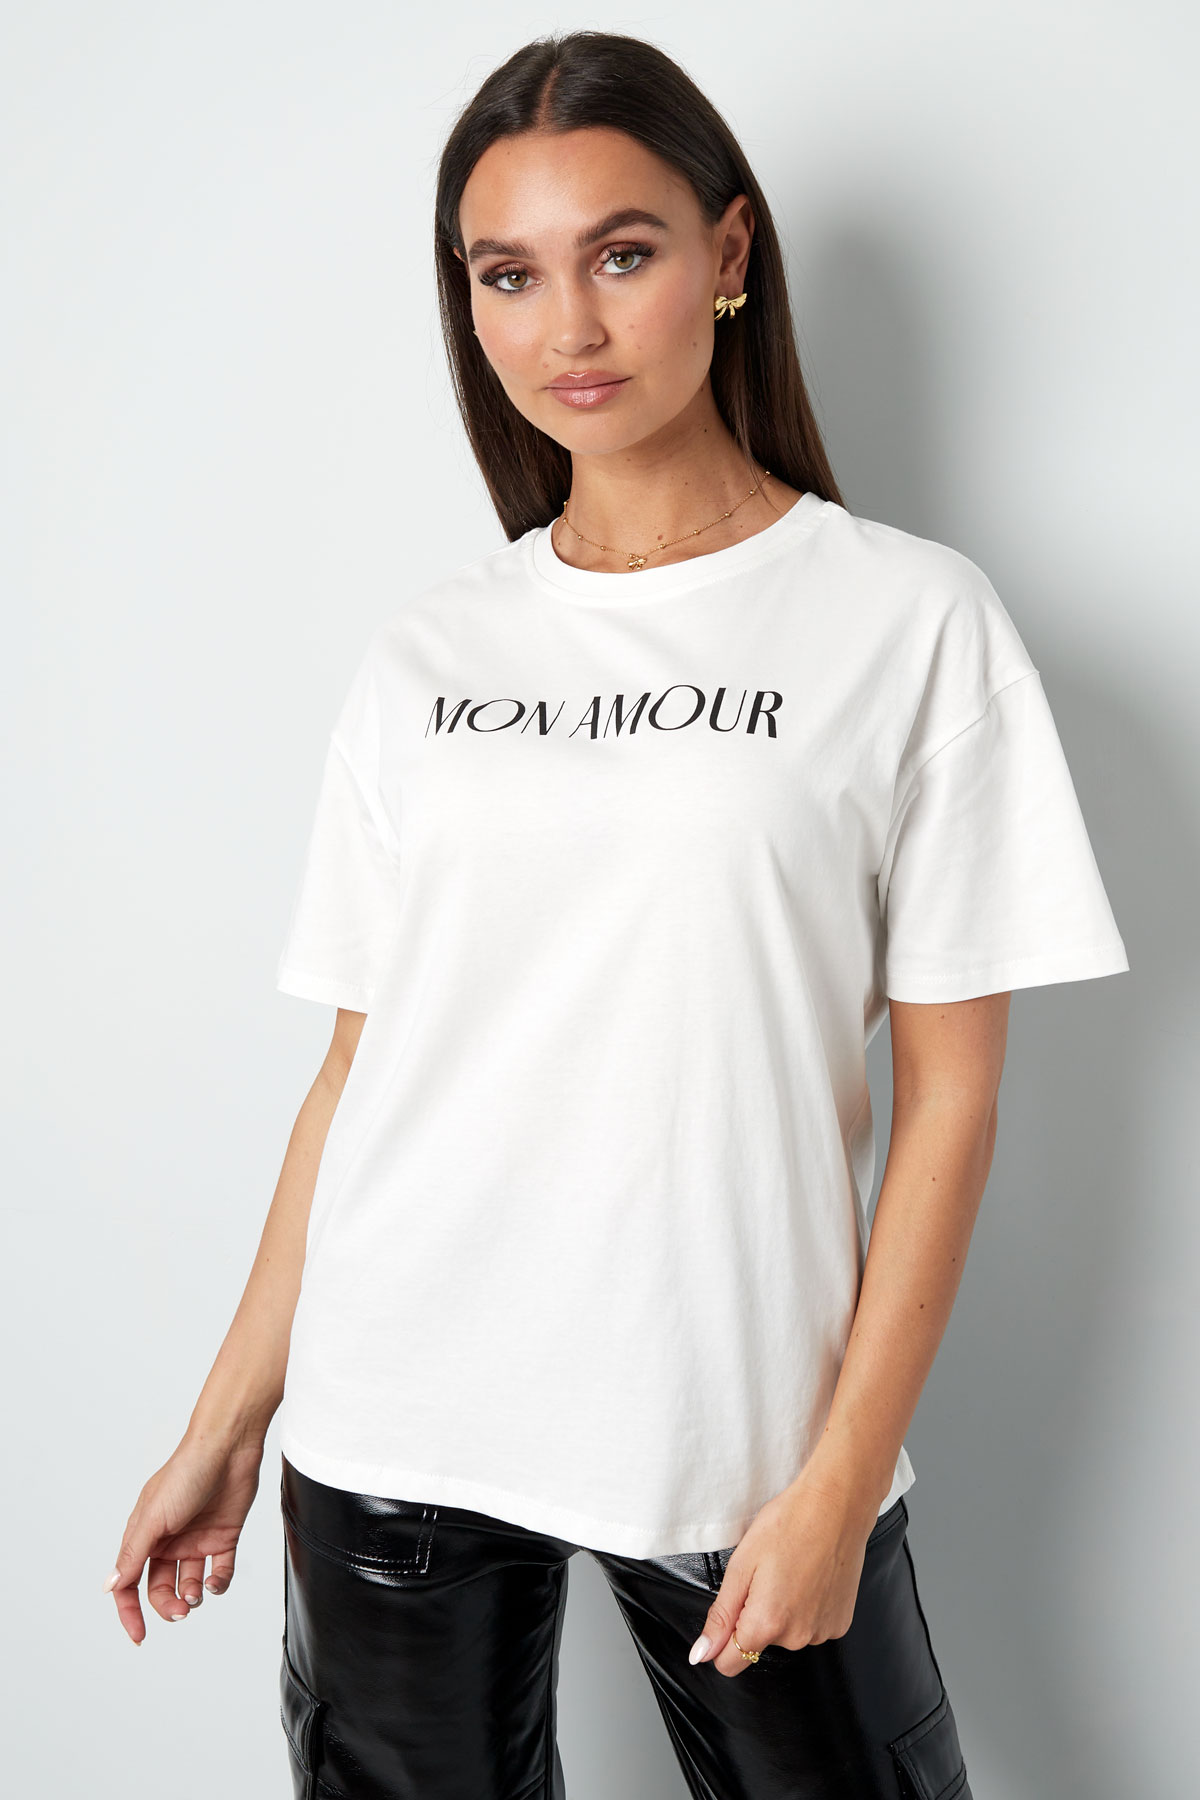 T-shirt mon amour - black and white h5 Picture2